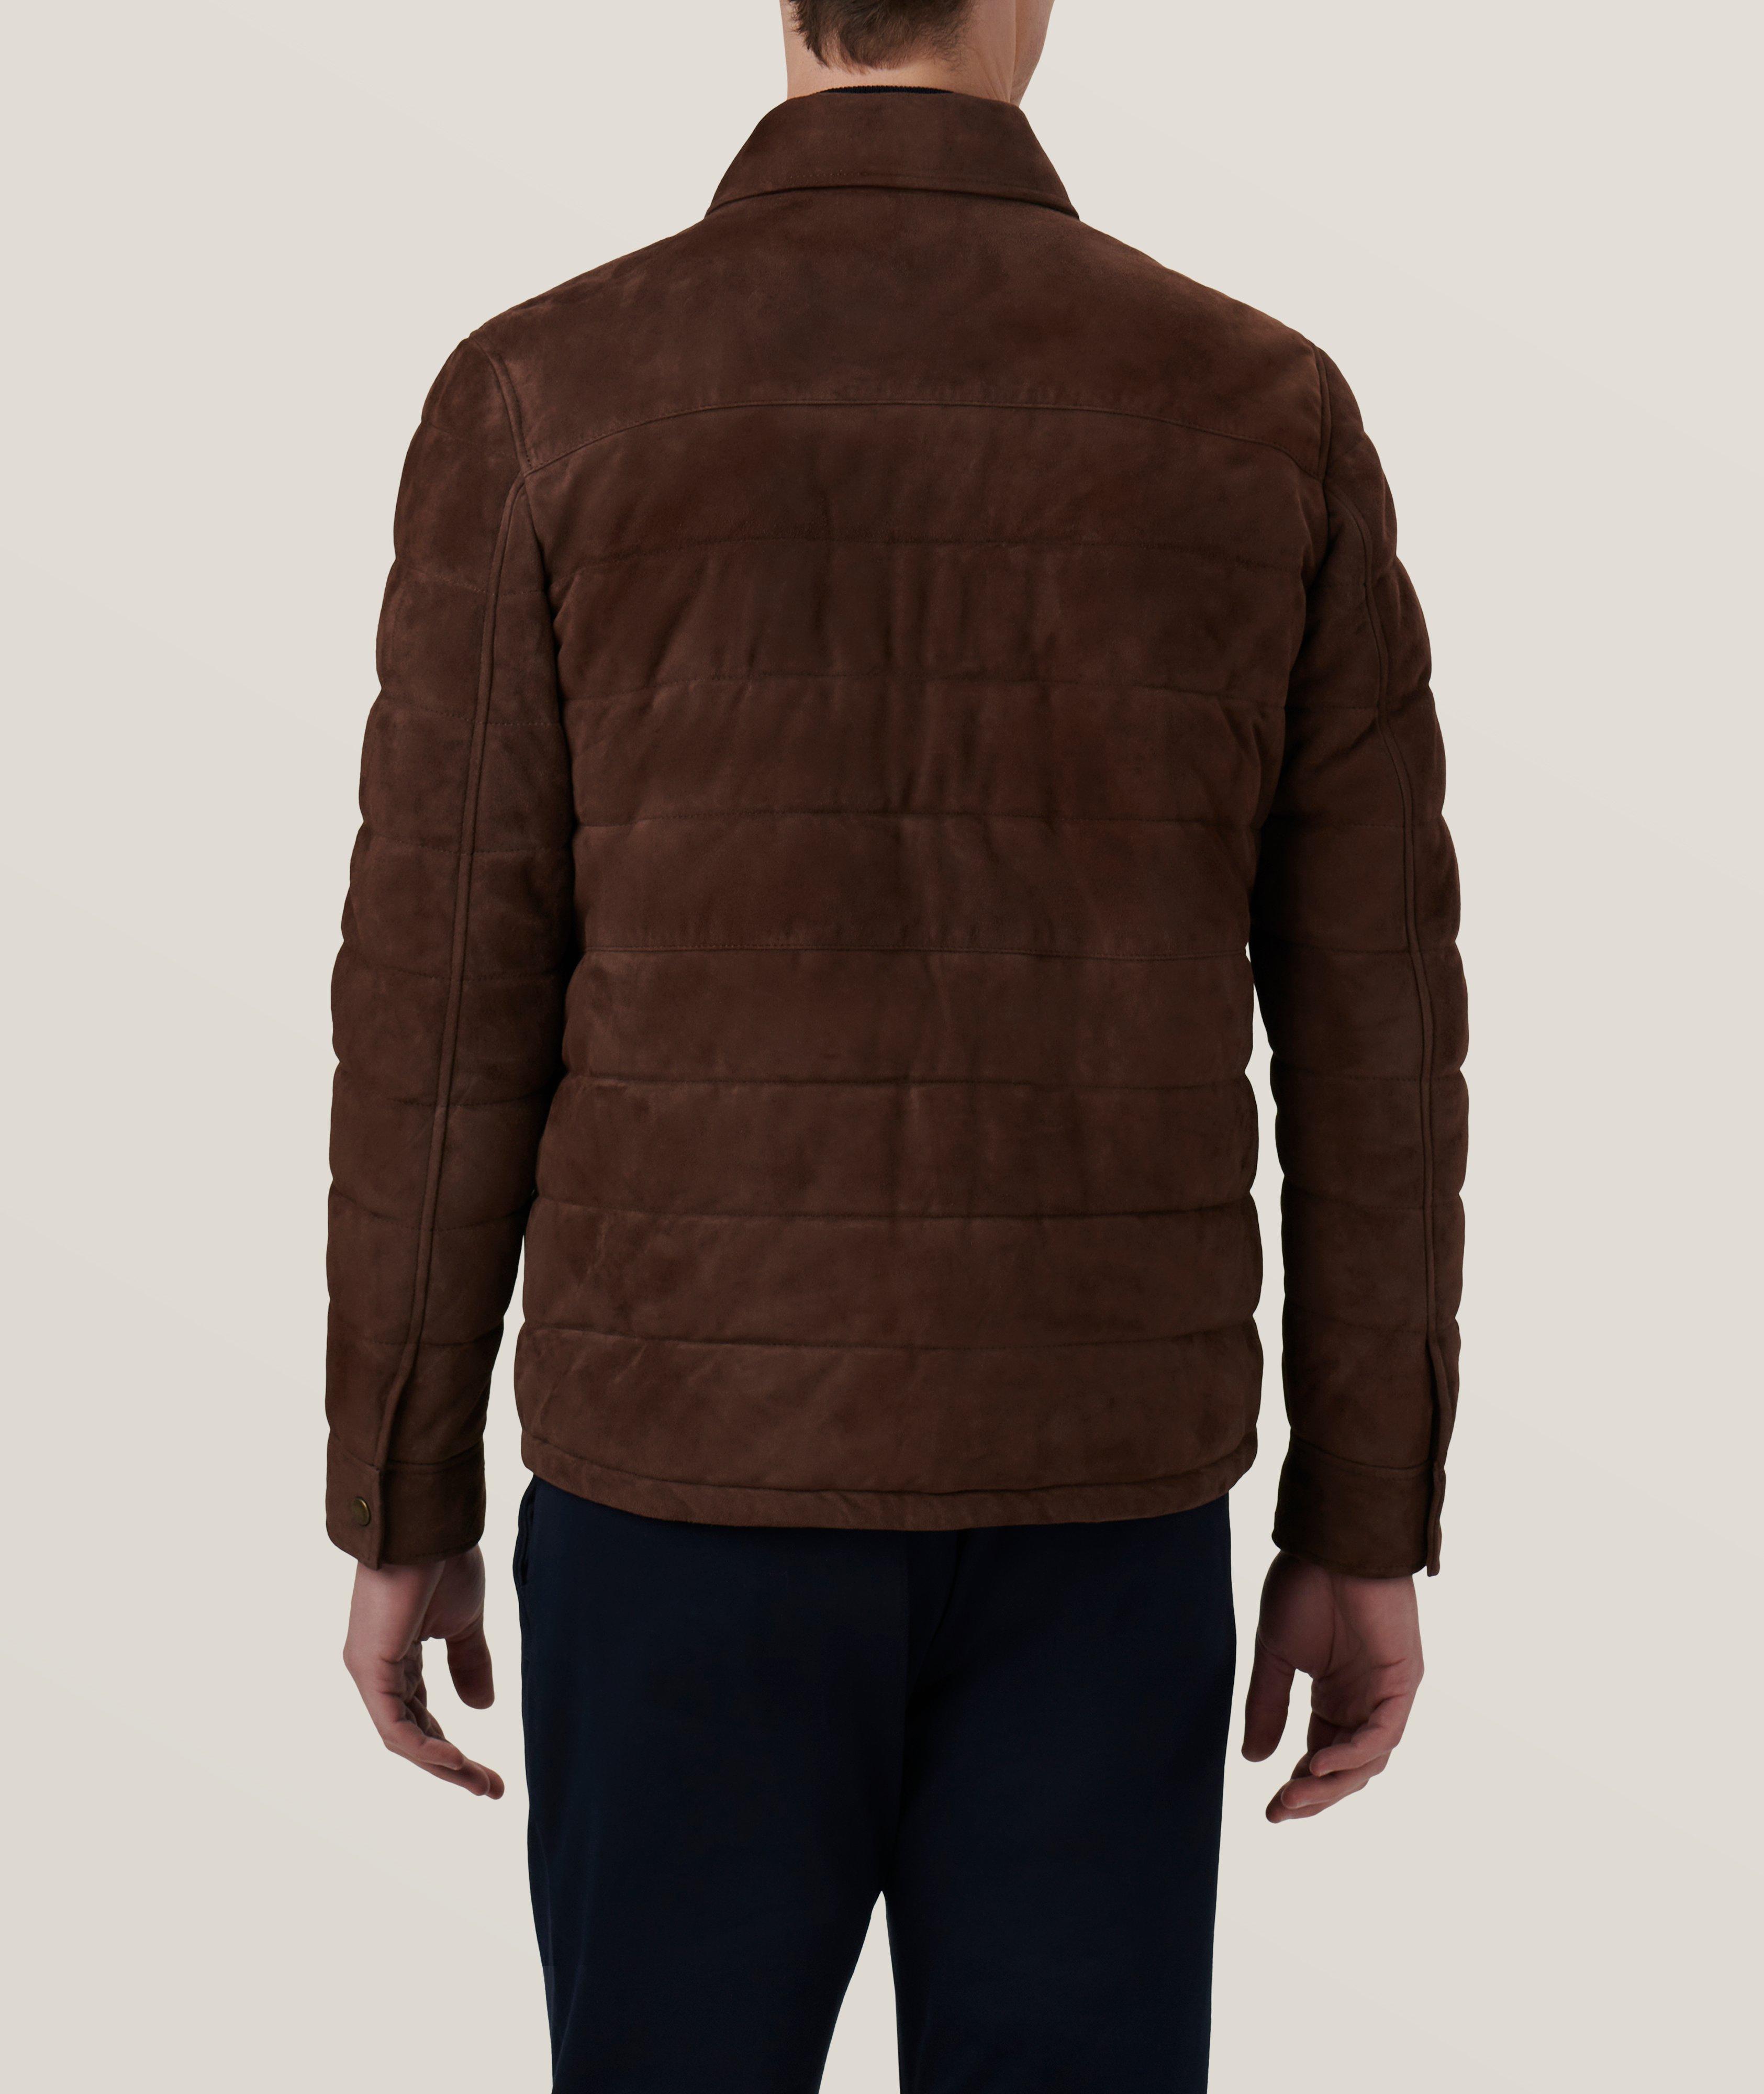 Quilted Suede Jacket image 4